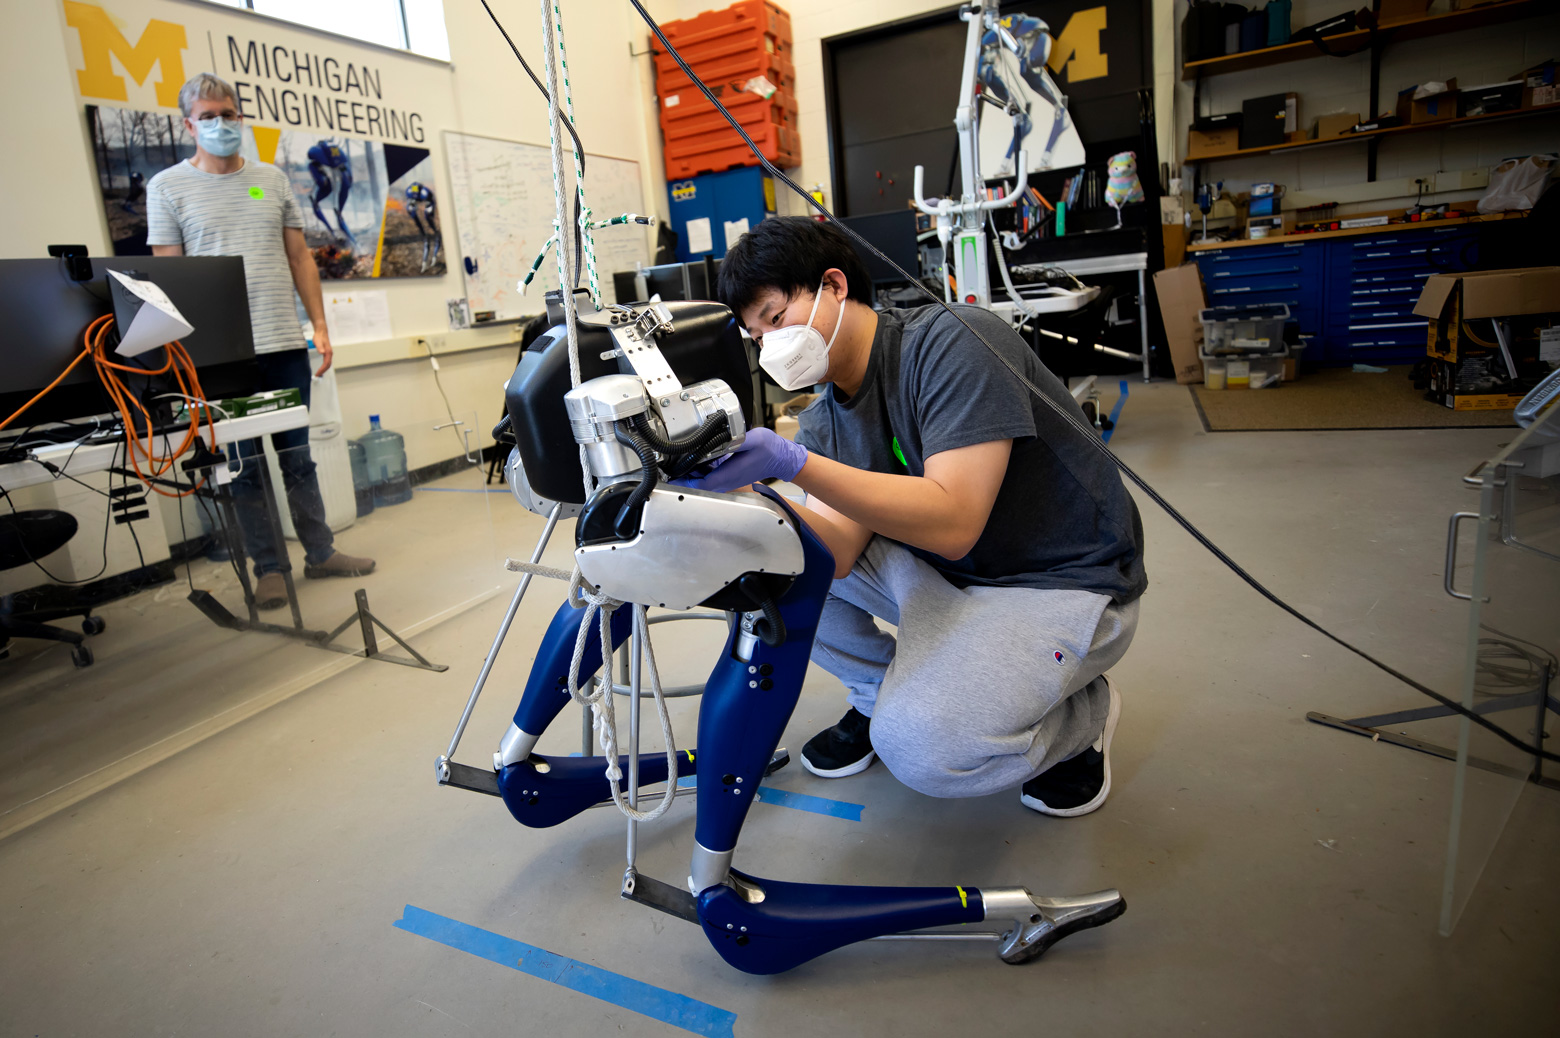 Yukai Gong, Robotics PhD Student, installs a battery into Cassie, a bipedal robot, as Jessy Grizzle, Director of the Robotics Institute, looks on in their lab on North Campus of the University of Michigan in Ann Arbor, MI on May 26, 2020. Photo: Joseph Xu/Michigan Engineering